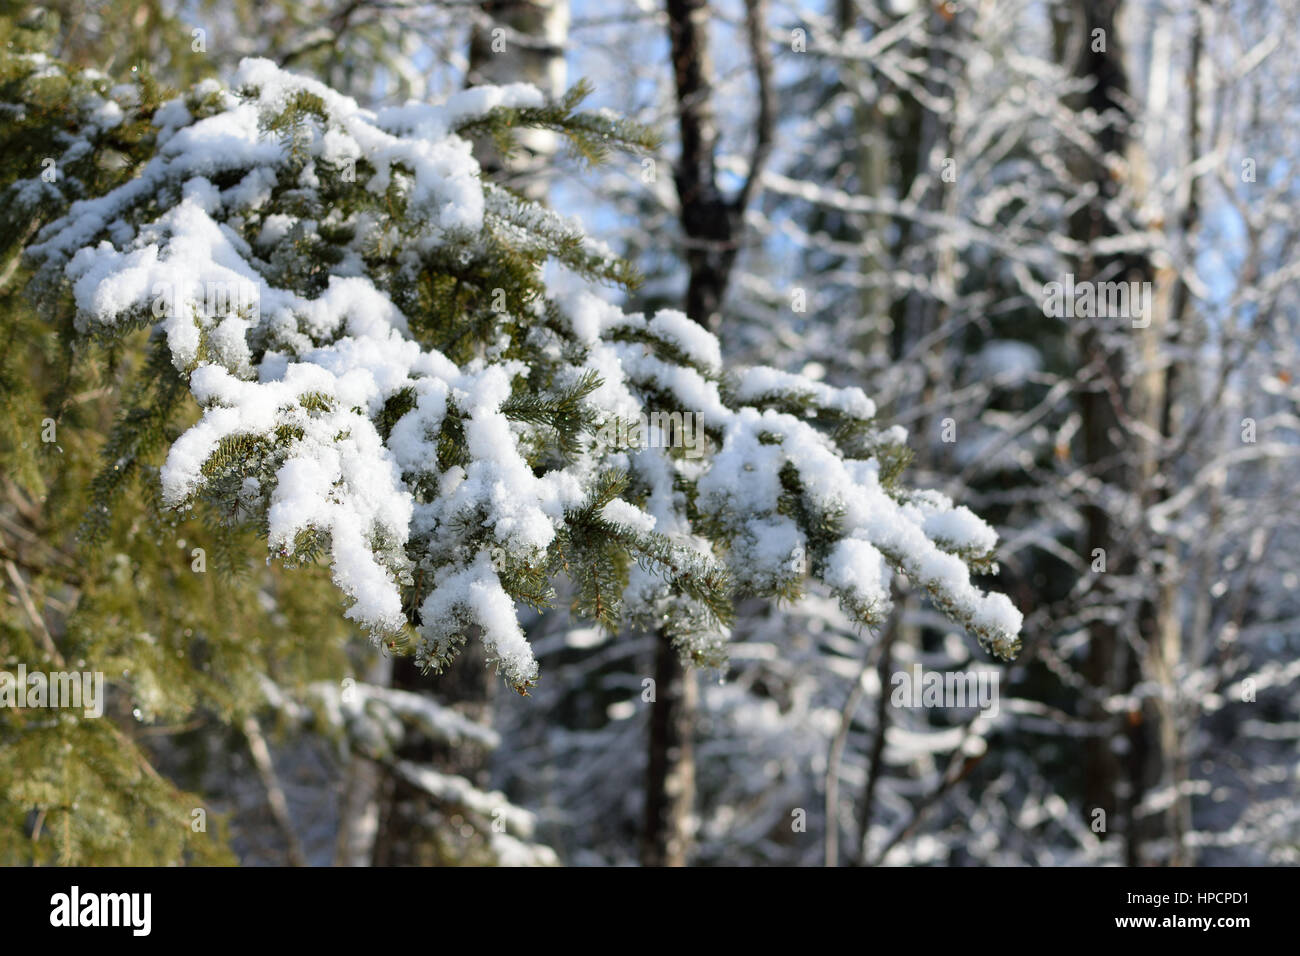 Snow Covered White Spruce (Picea glauca) Branch Stock Photo